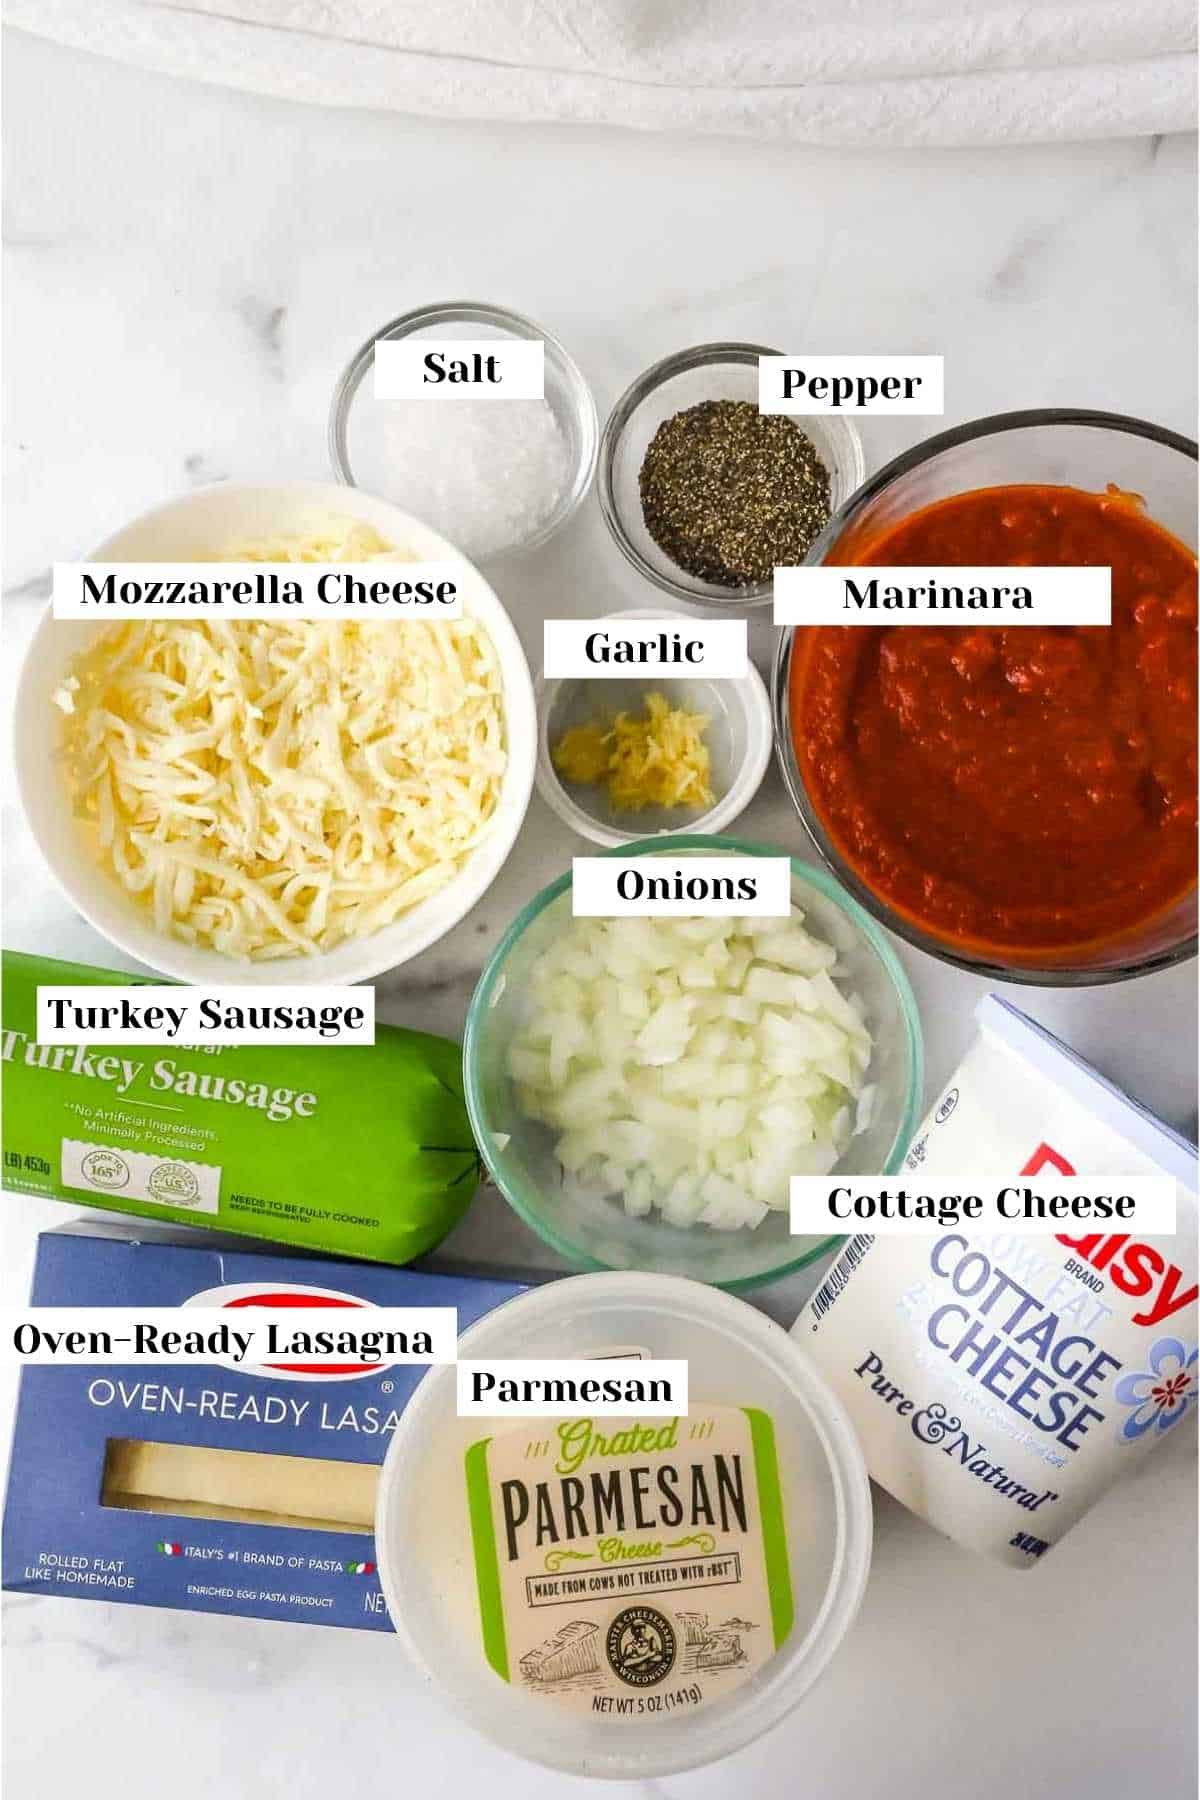 labeled ingredients for this lazy lasagna recipe.